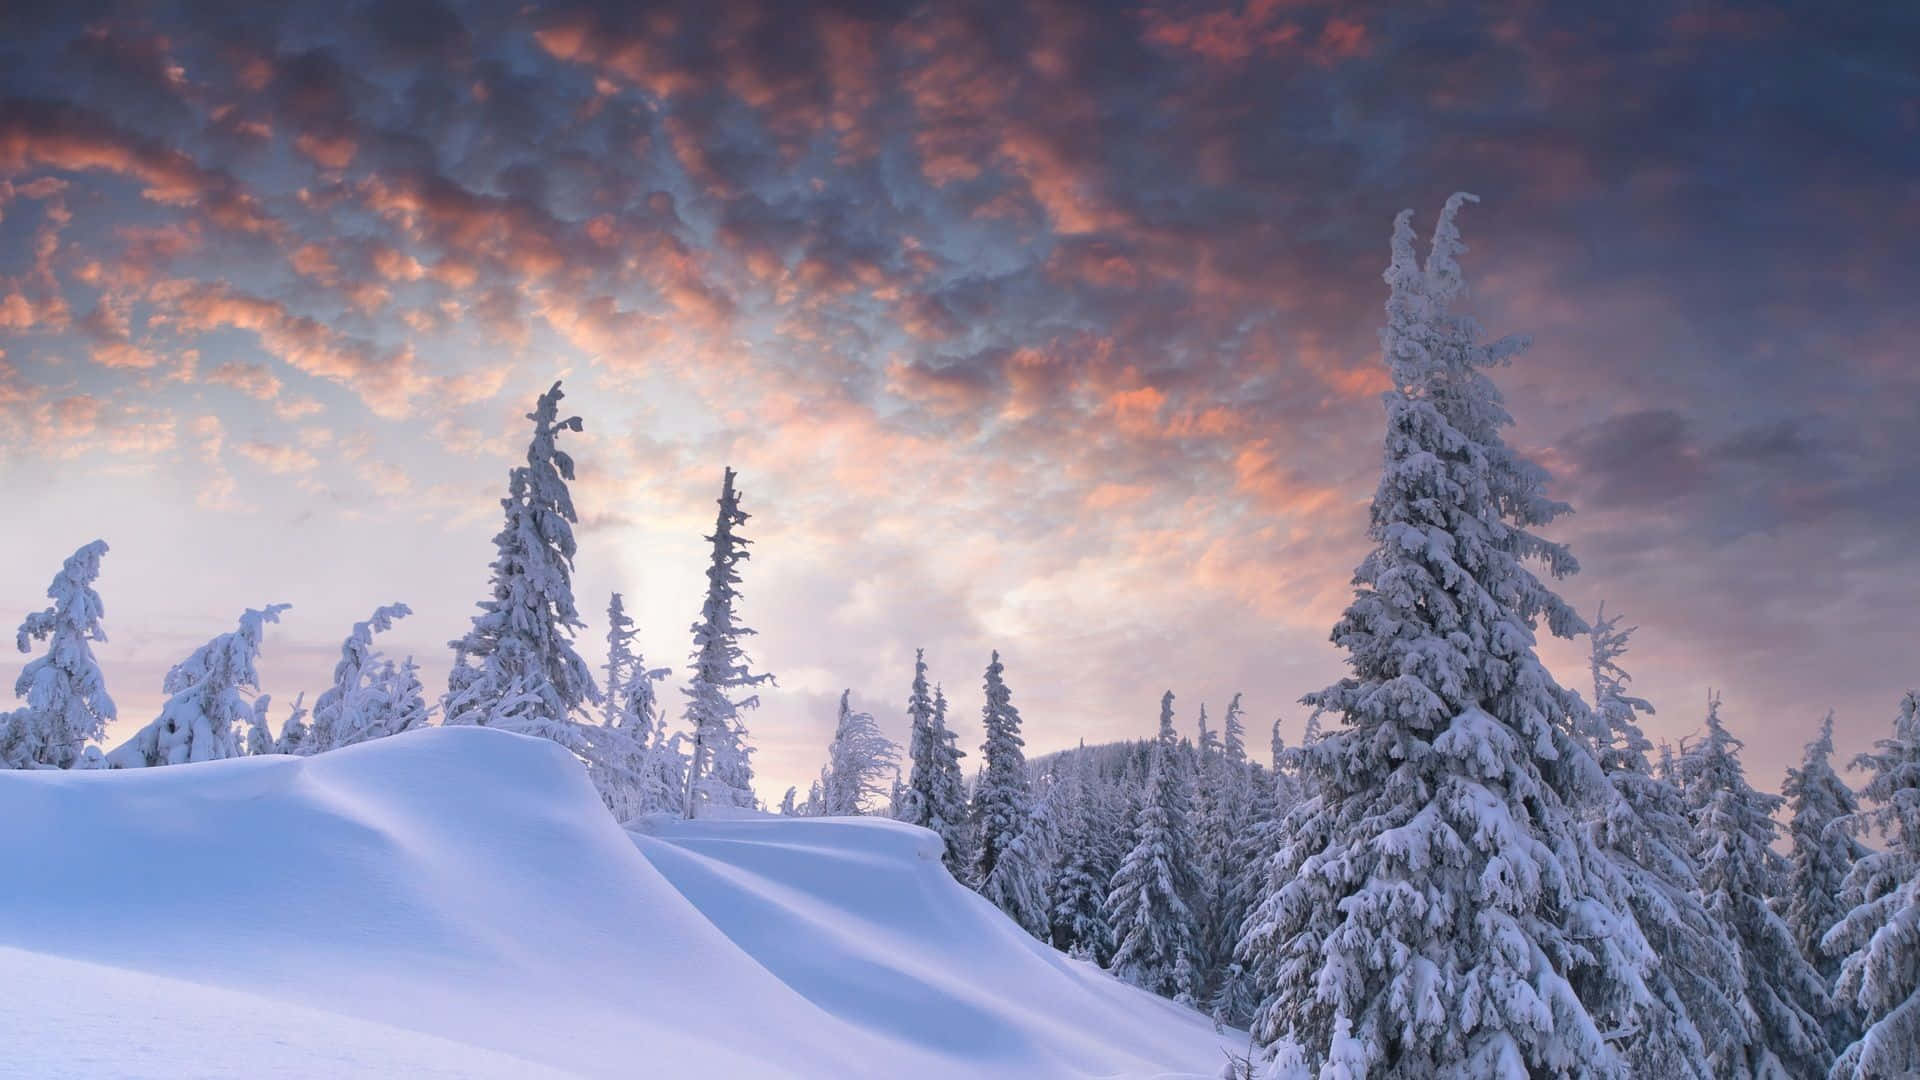 Celebrate the Magic of Christmas with a Snowy Desktop Wallpaper